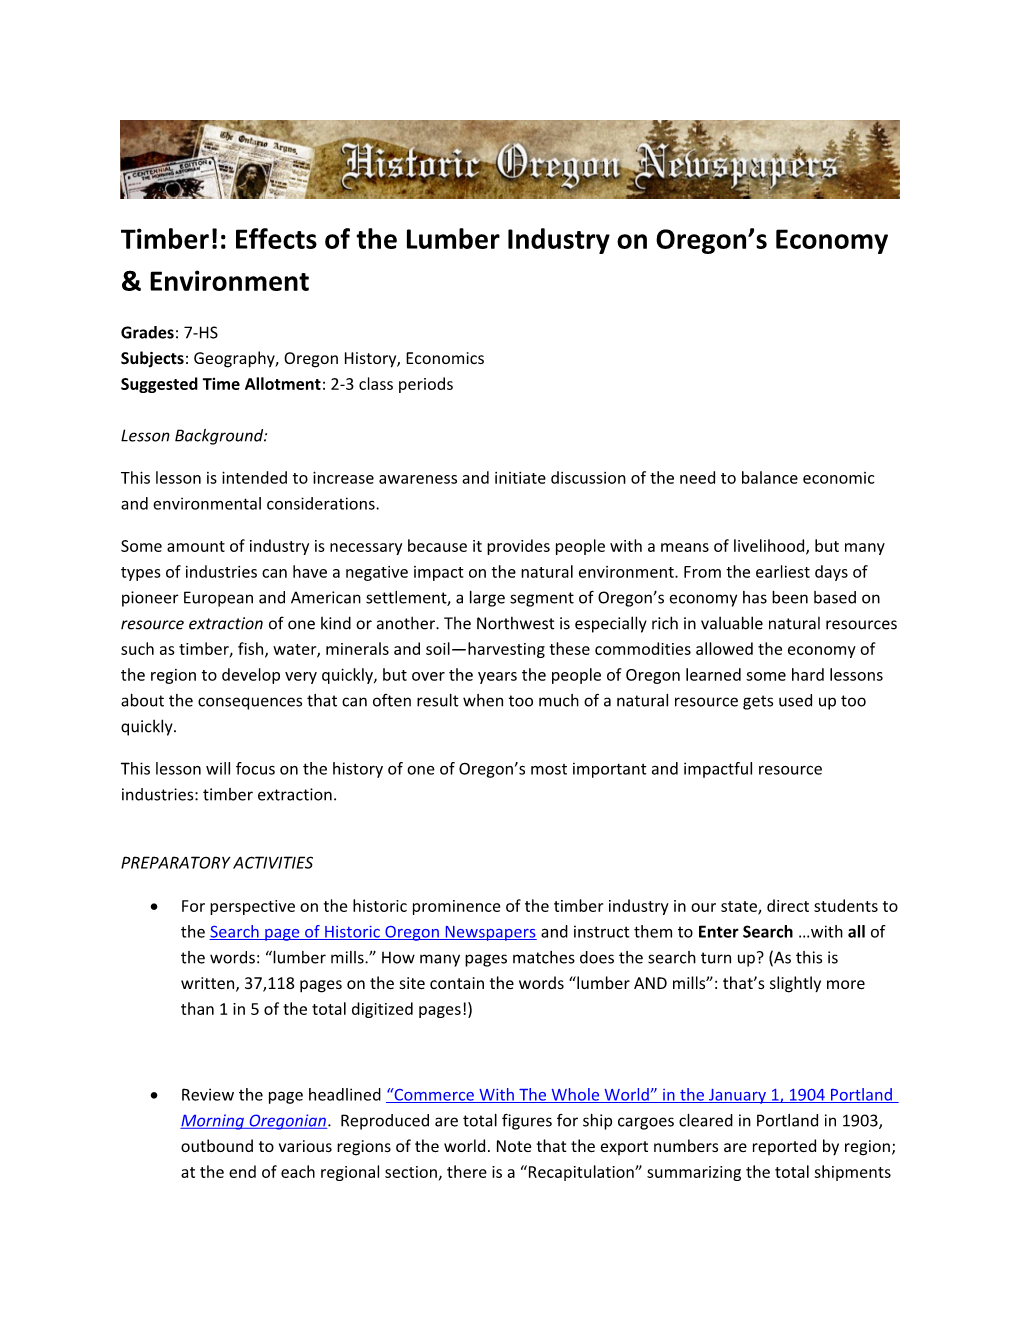 Timber!: Effects of the Lumber Industry on Oregon S Economy & Environment